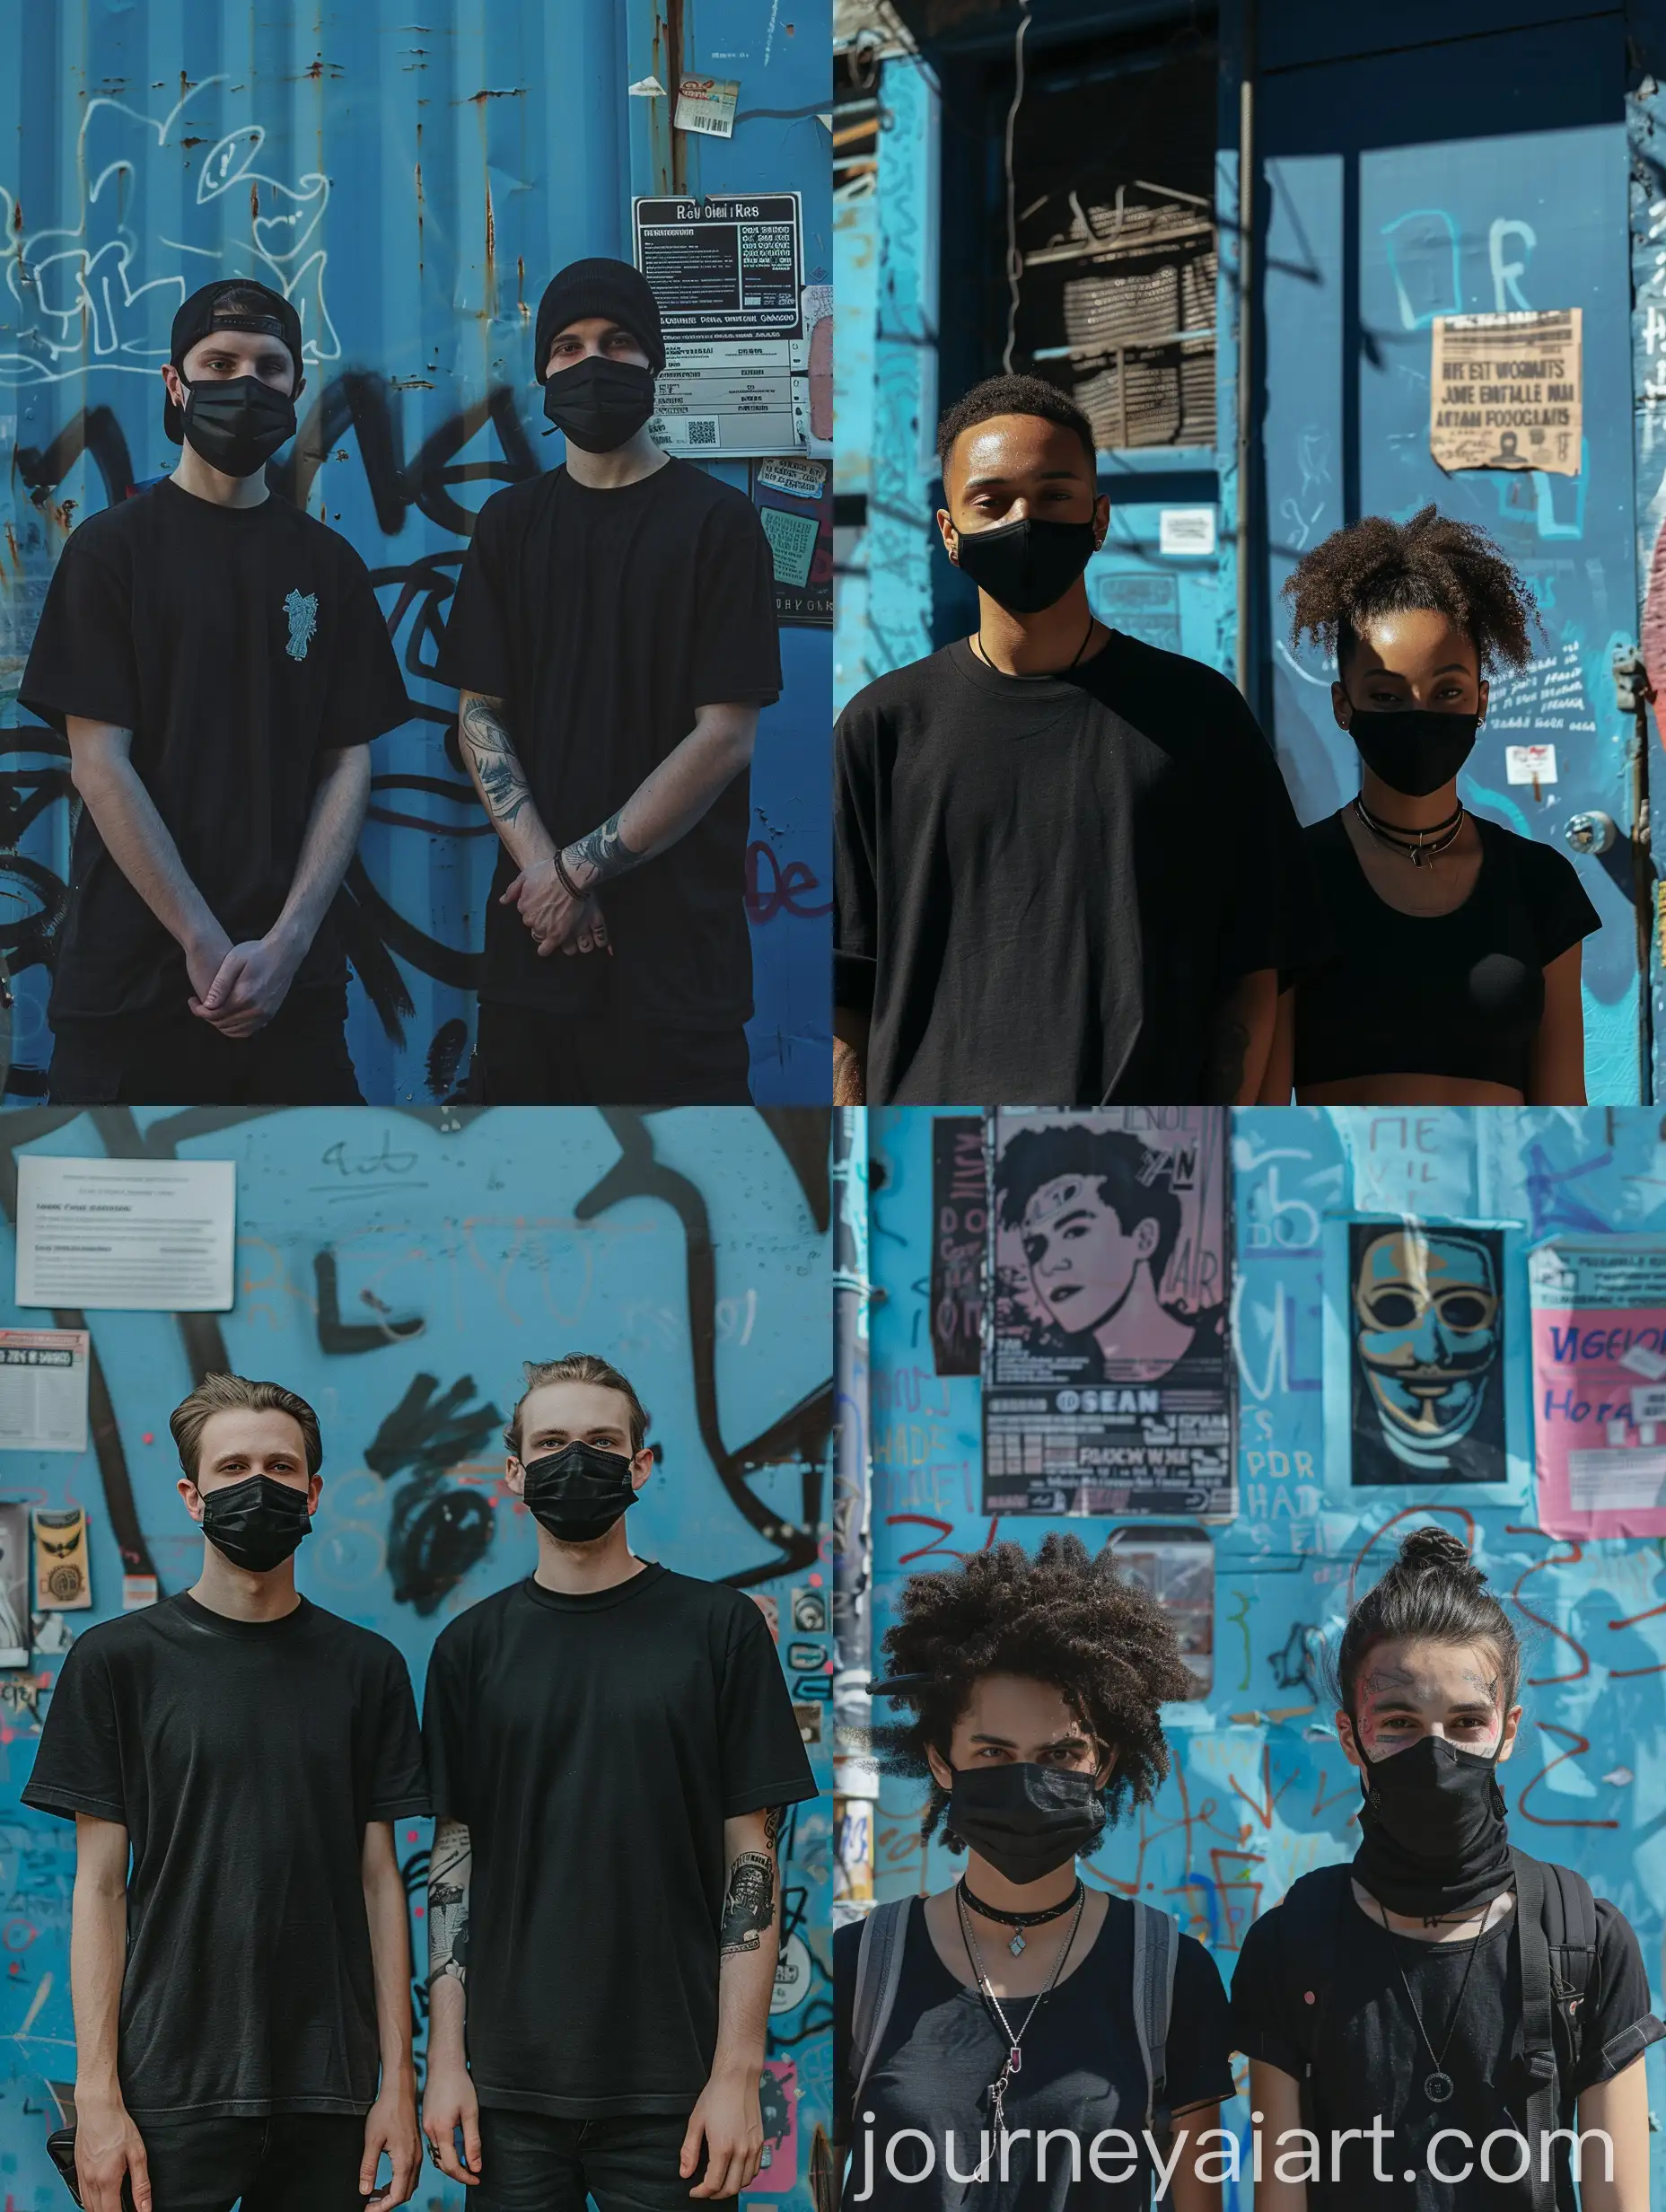 Two-Individuals-in-Black-Masks-and-Shirts-Against-Blue-Wall-with-Posters